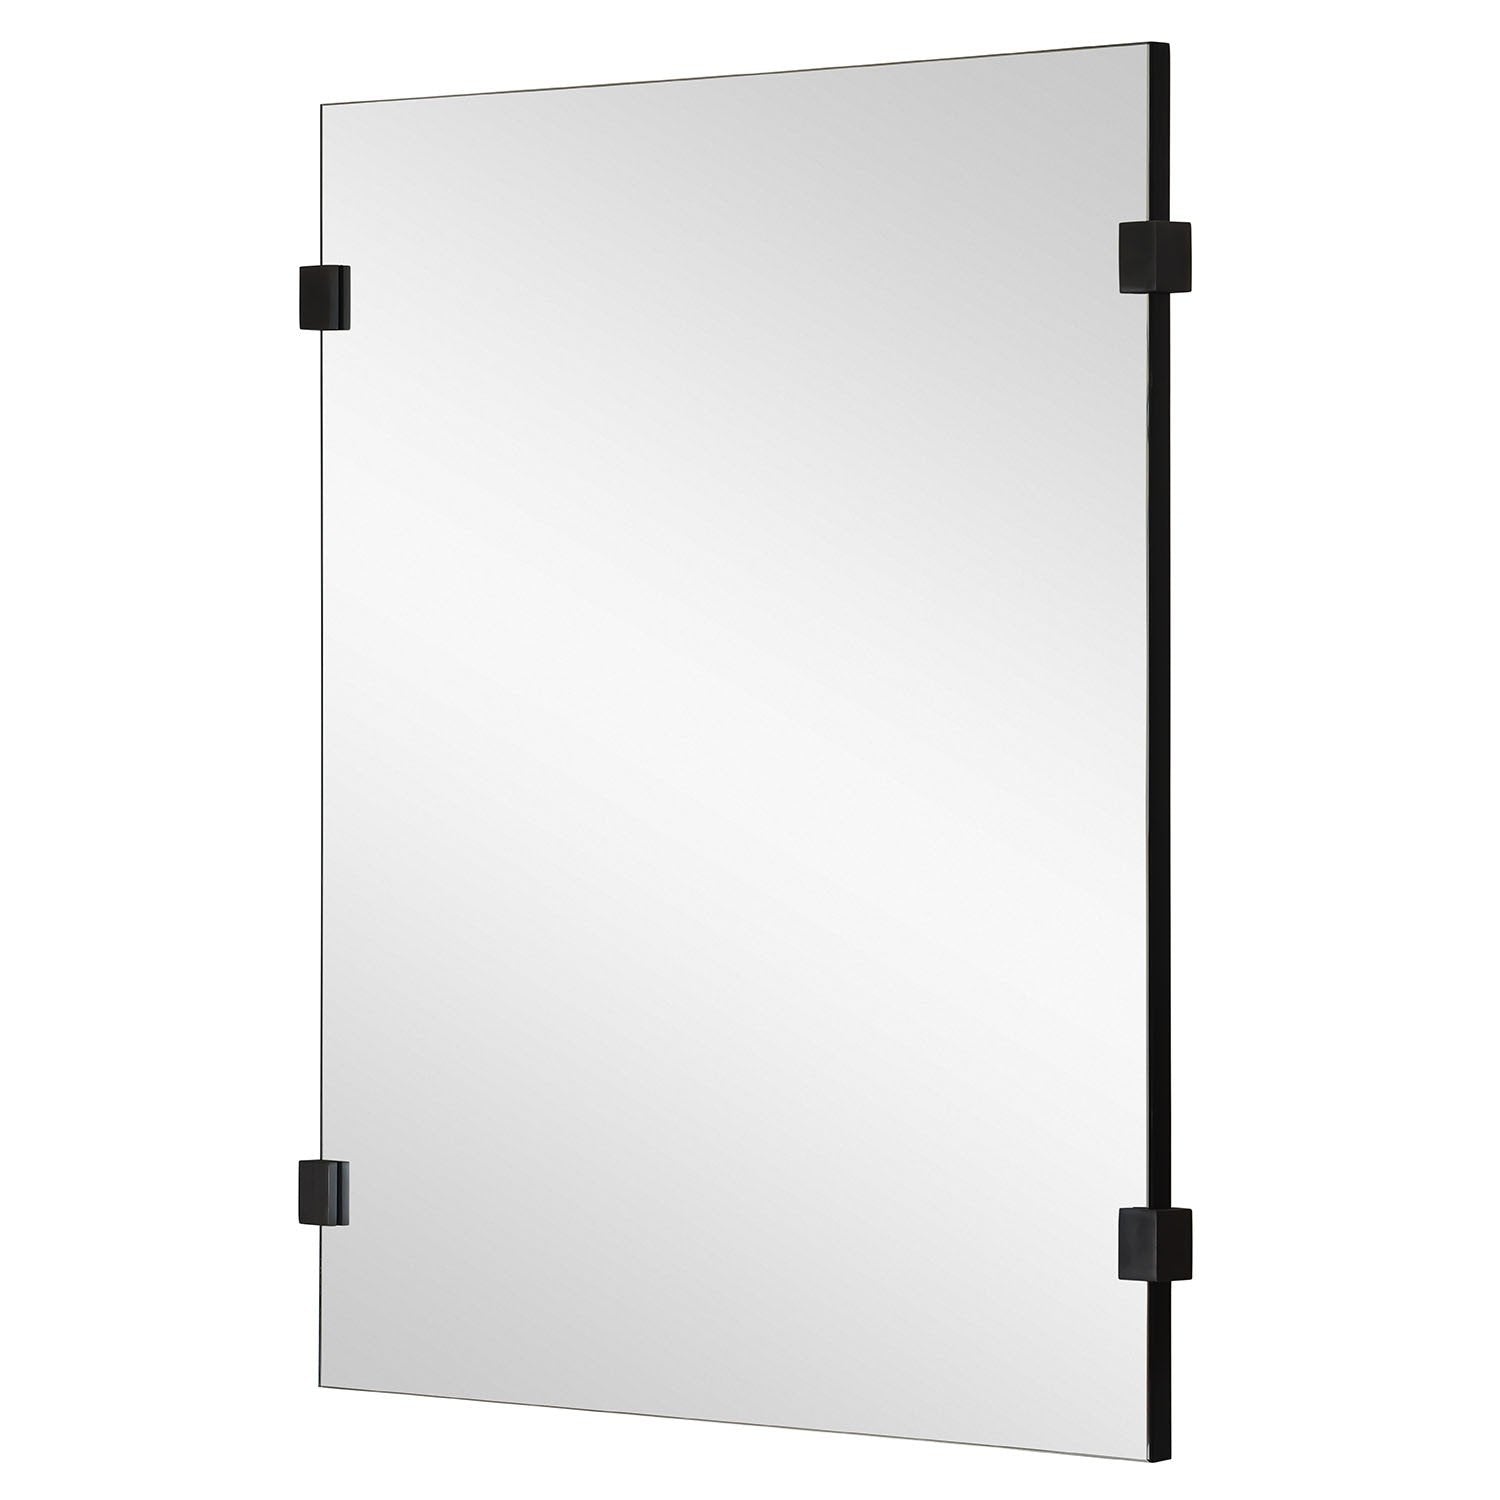 Fig Linens - Mirror Image Home - Rectangular Wall Mirror with Black Nickel Clips - Side